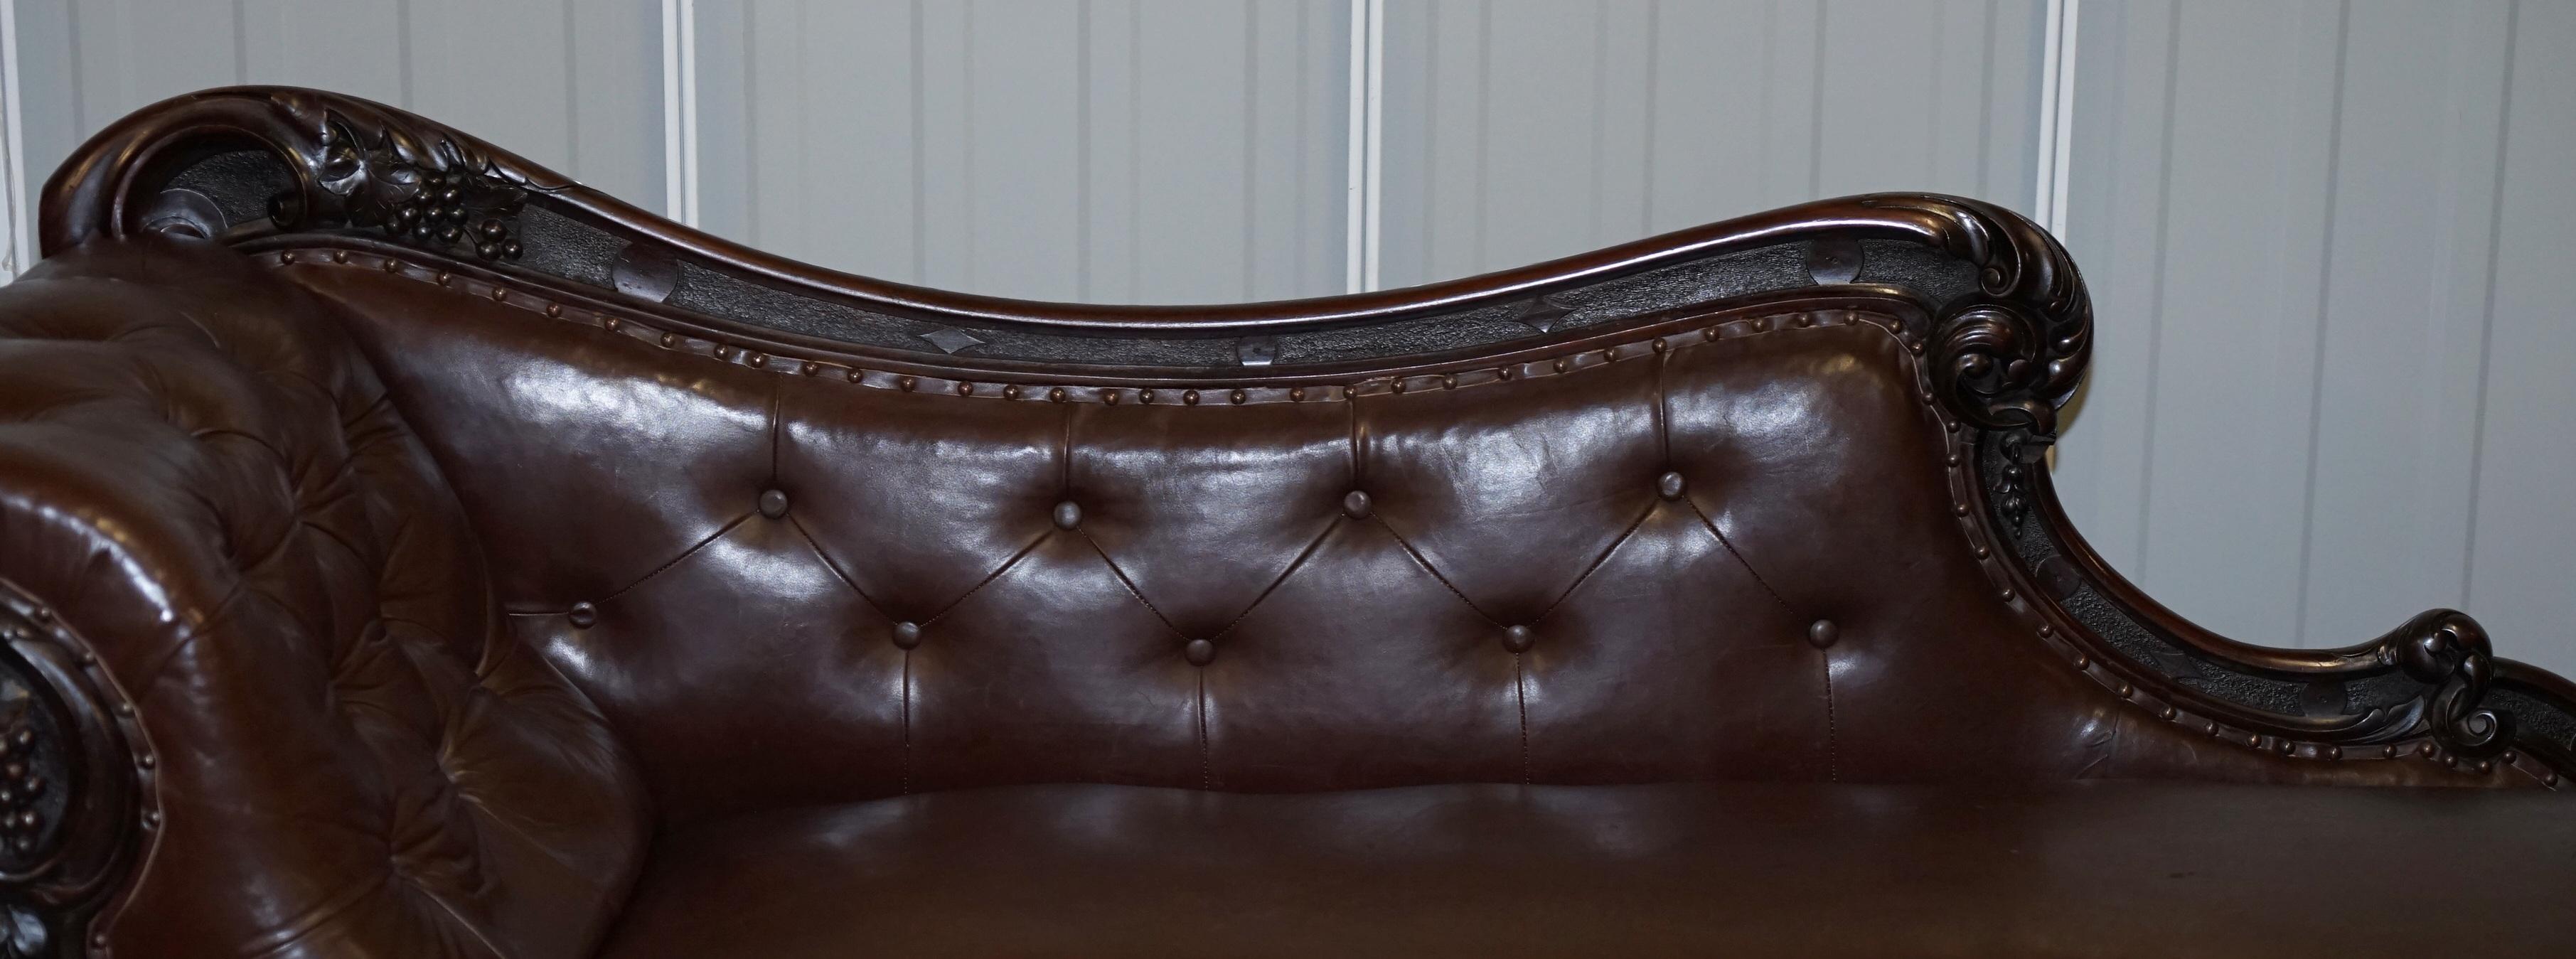 English Regency Mahogany & Brown Leather Chesterfield Buttoned Chaise Lounge Sofa Chair